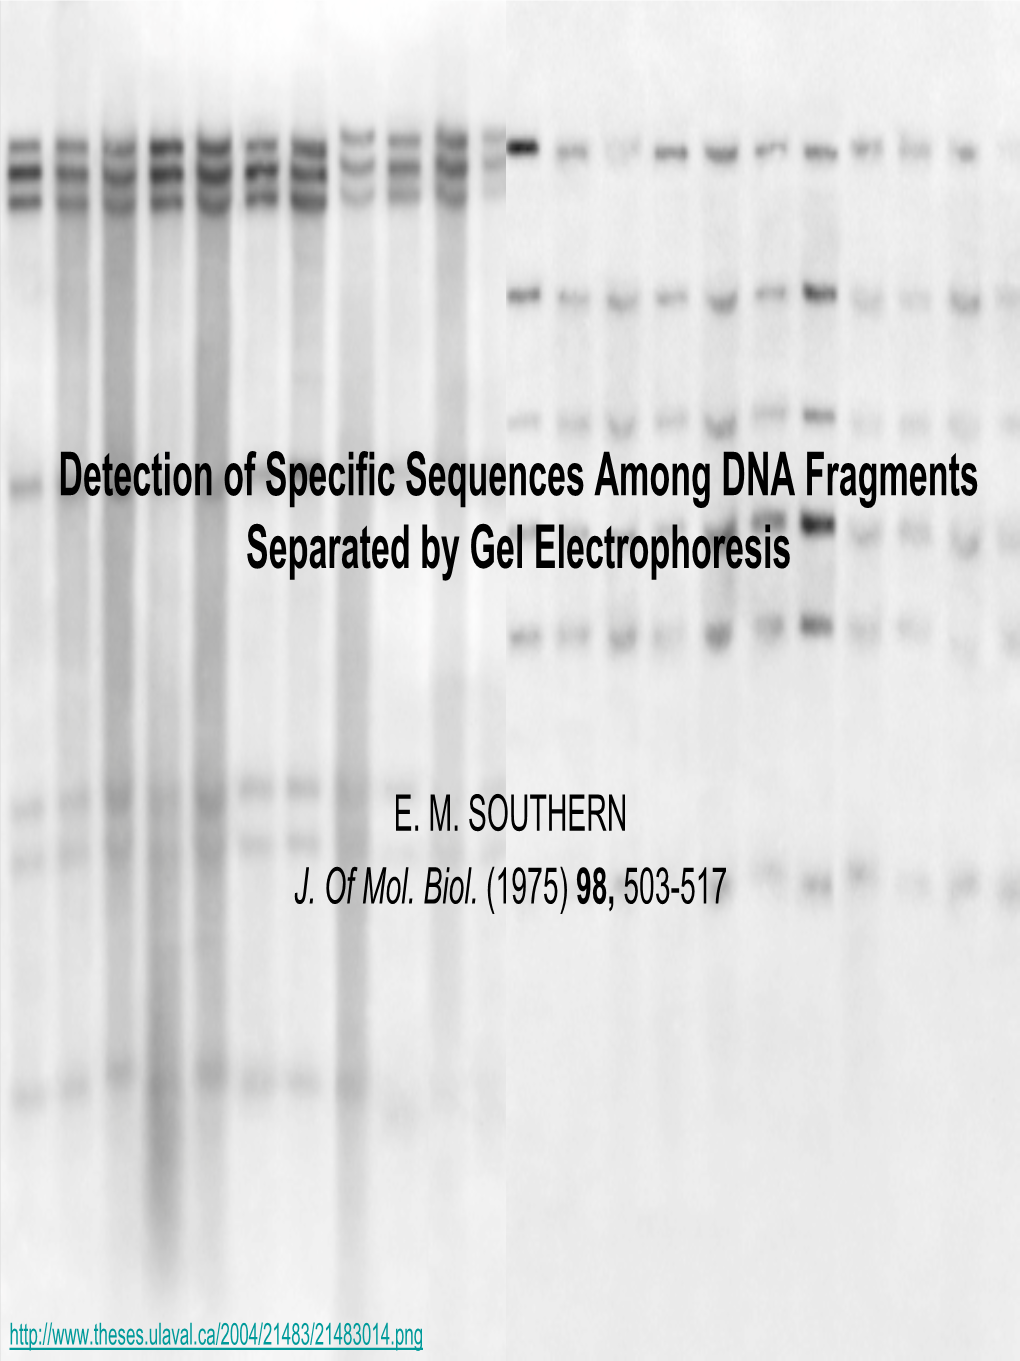 Detection of Specific Sequences Among DNA Fragments Separated by Gel Electrophoresis